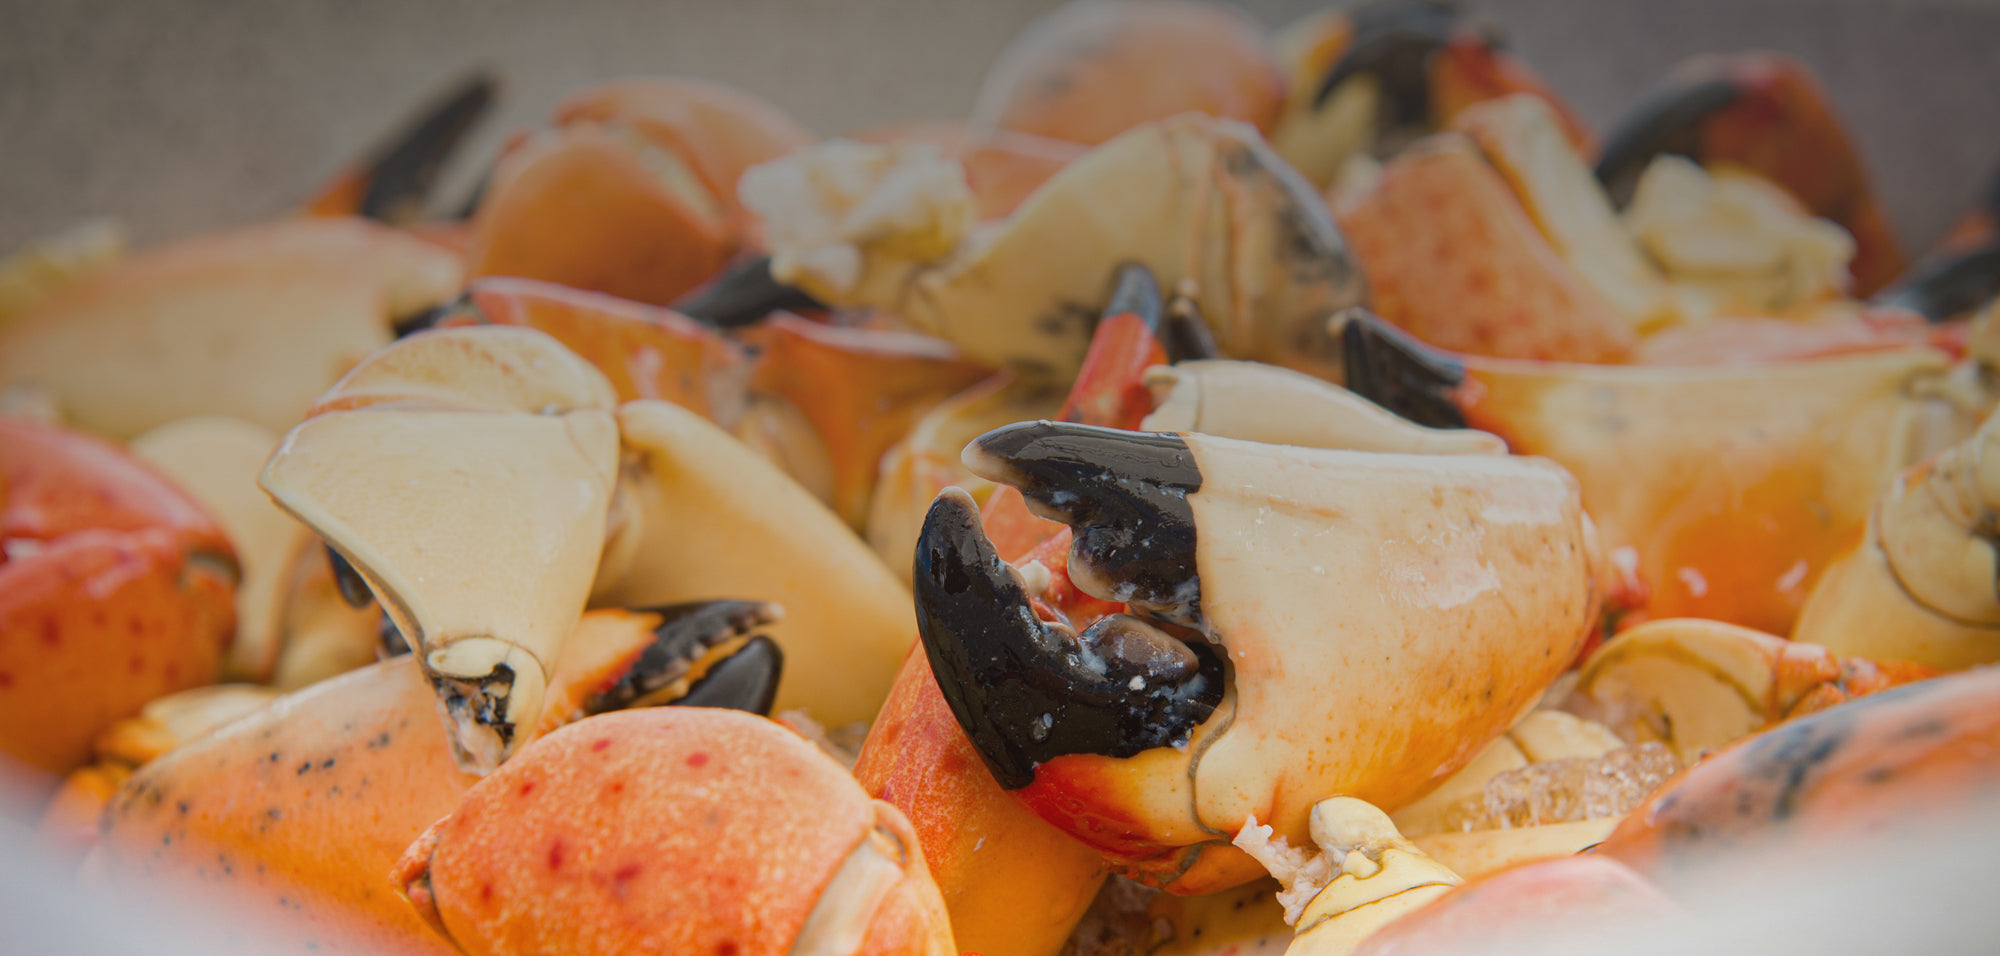 We ship your fresh Florida stone crab claws overnight anywhere in the US and select international locations. Our claws are delivered fresh, never frozen right to you.